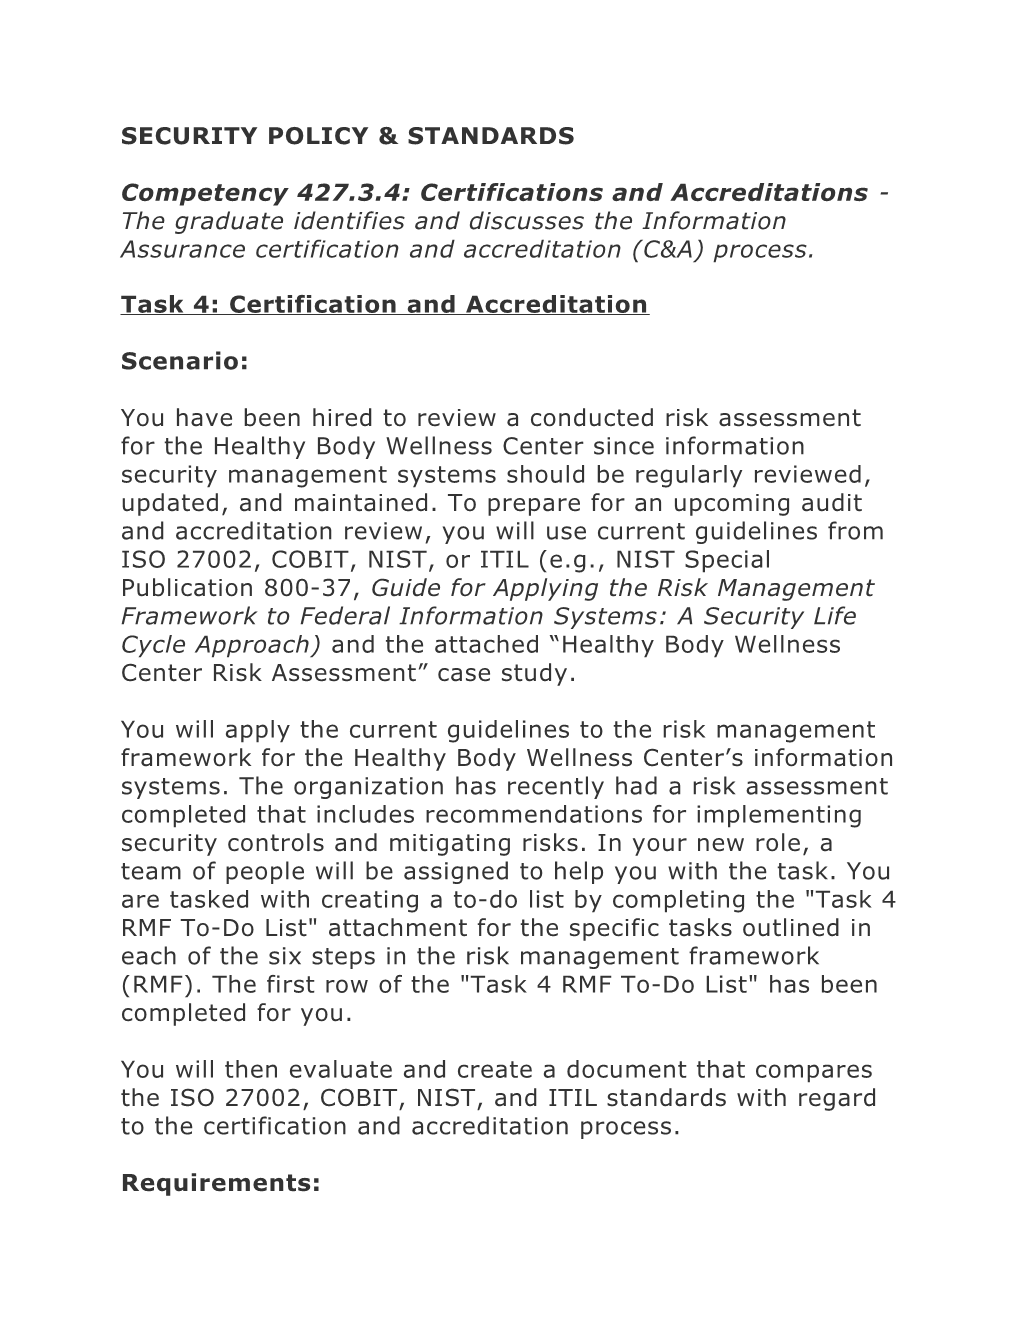 SECURITY POLICY & STANDARDS Competency 427.3.4: Certifications and Accreditations - The